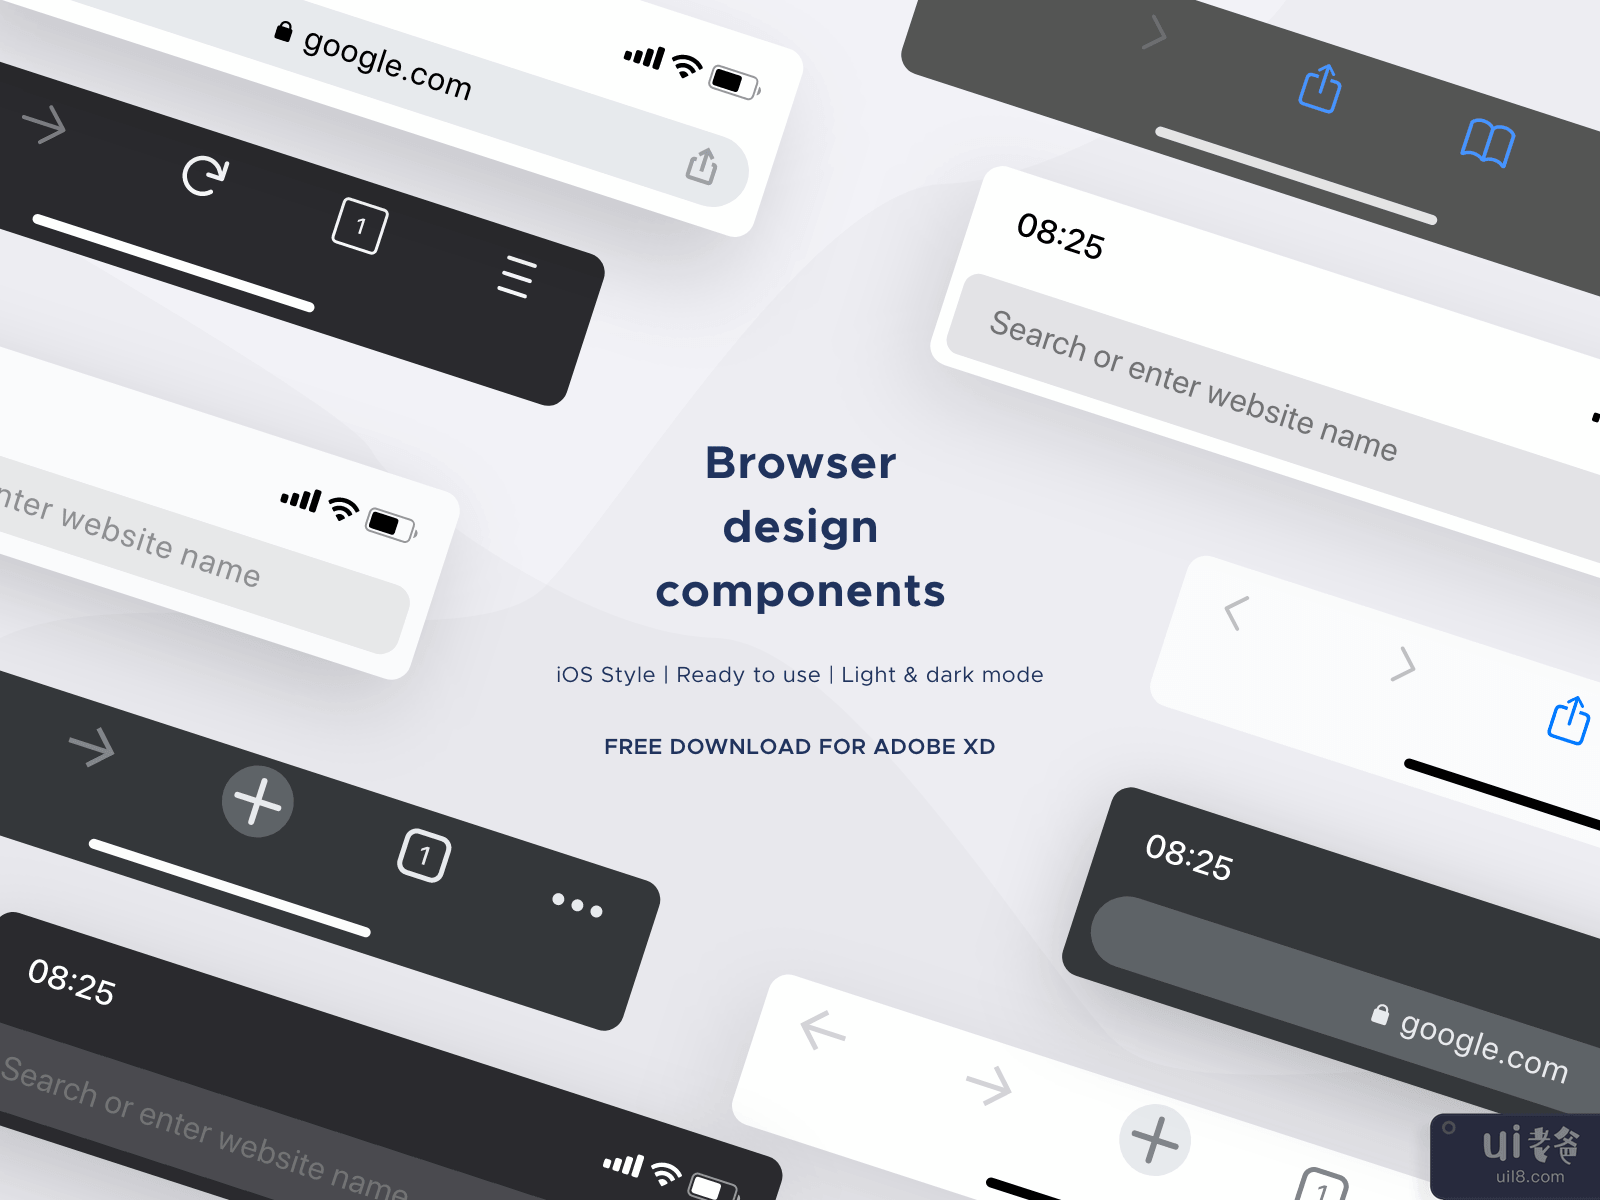 [Freebie] Mobile browser templates